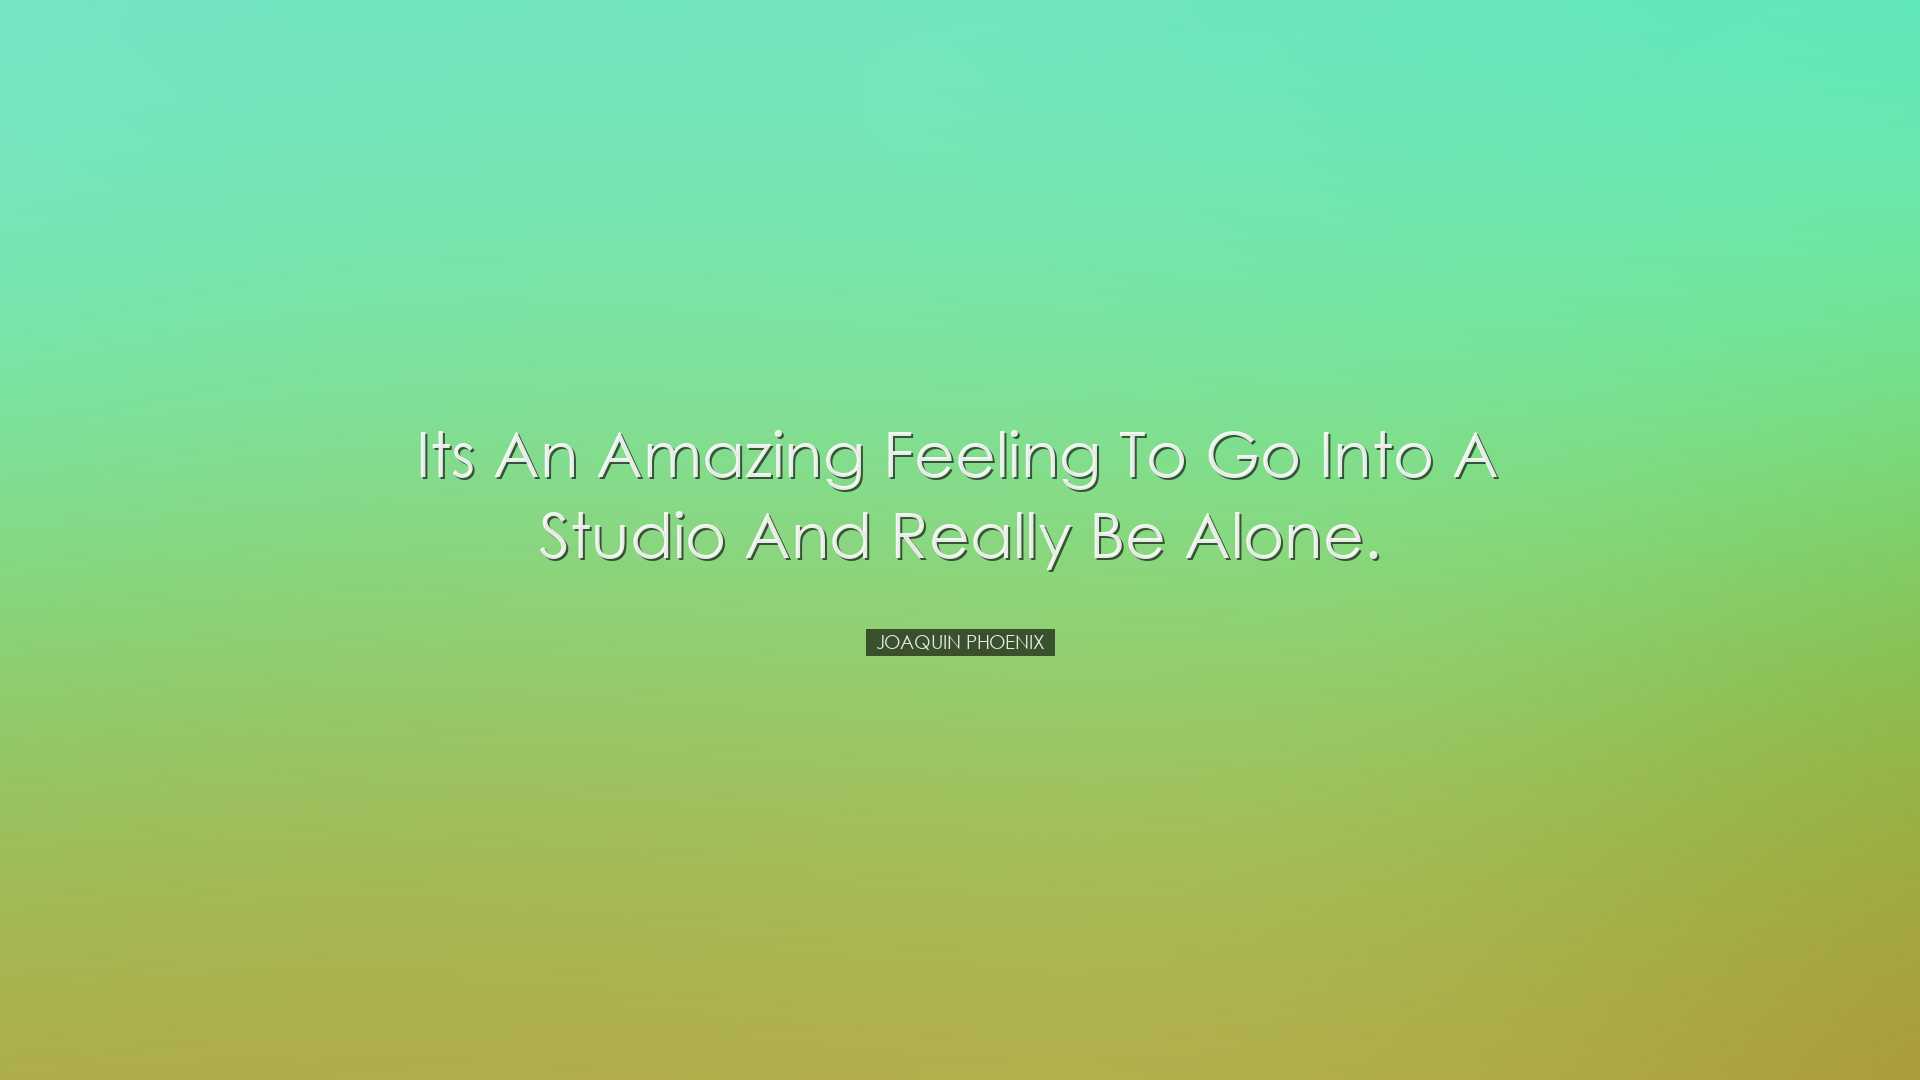 Its an amazing feeling to go into a studio and really be alone. -